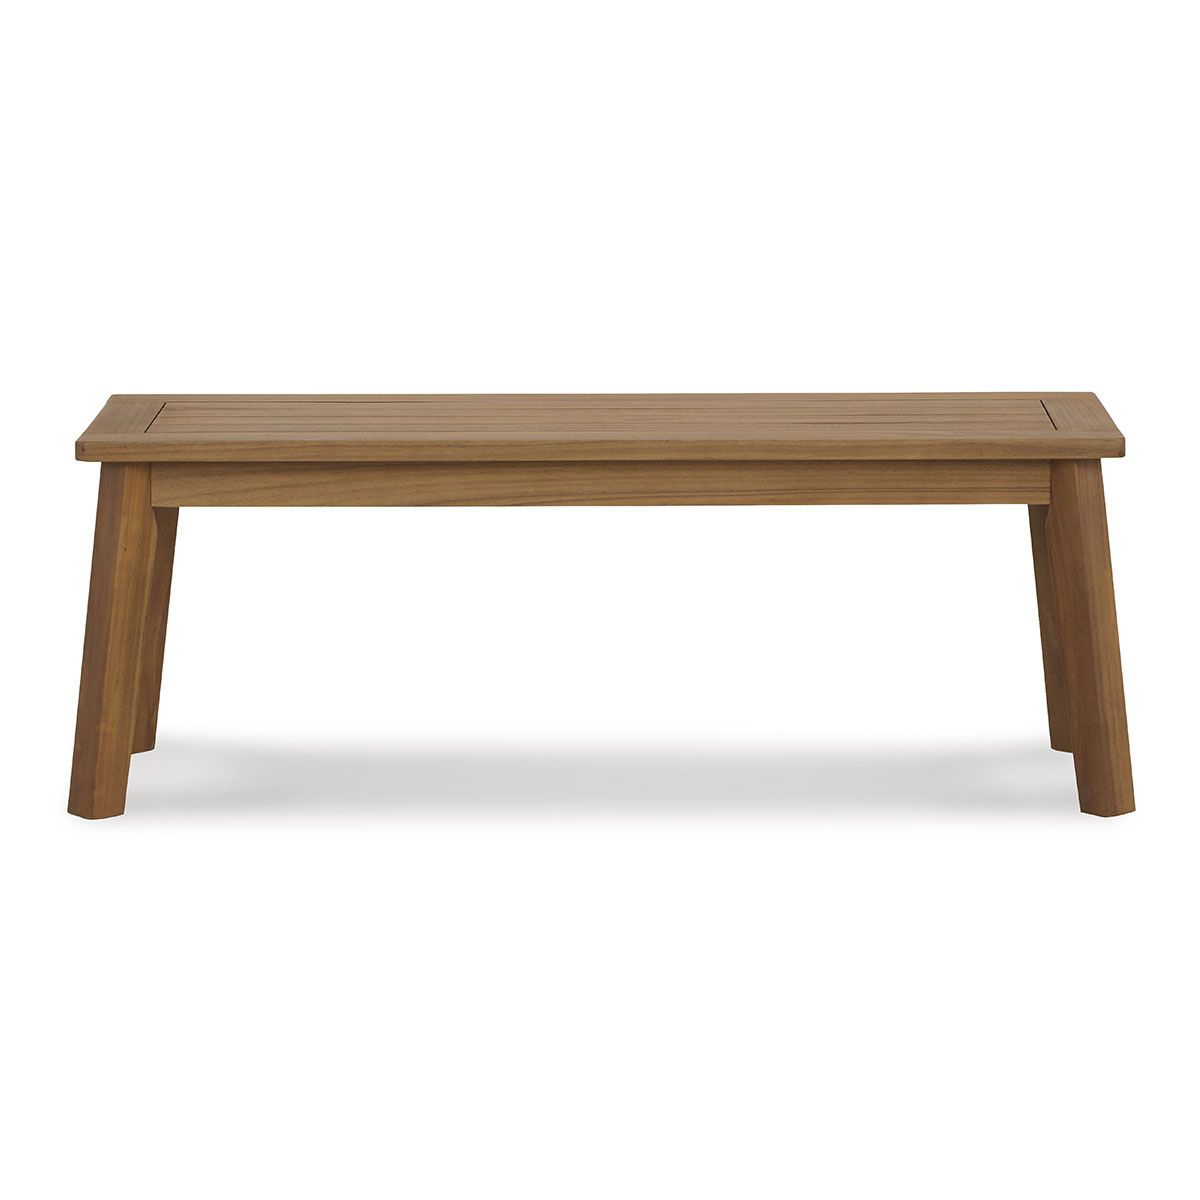 Picture of MARCO DINING BENCH